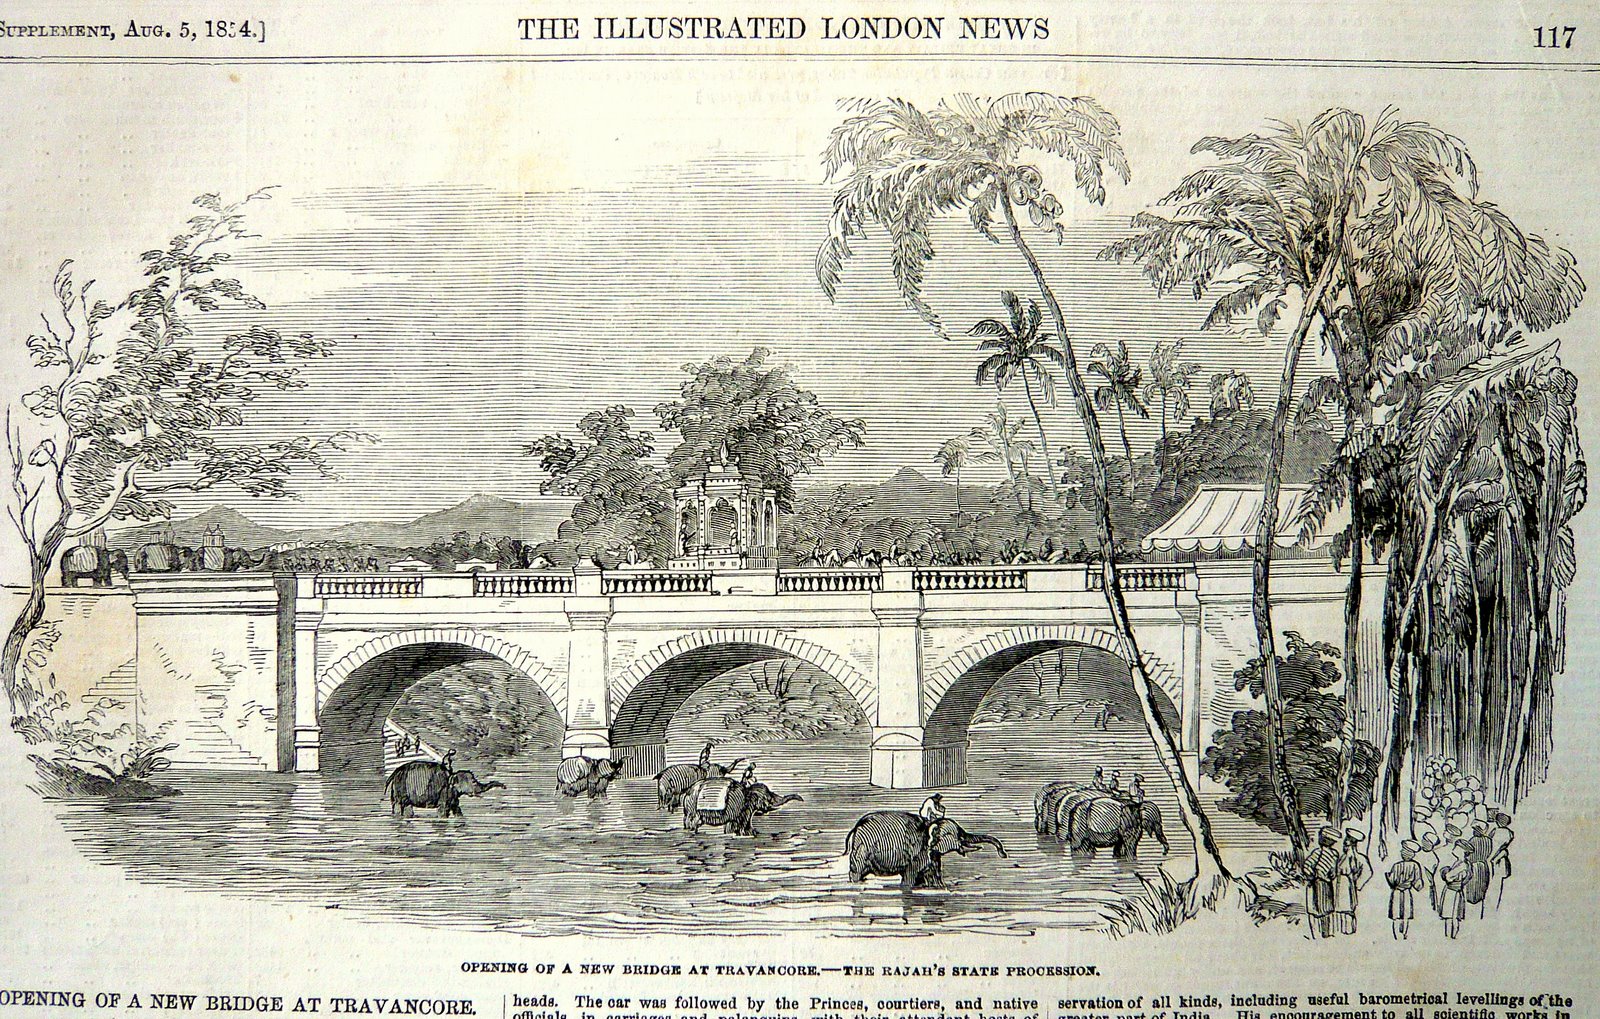 [Illustrated+London+News+of+5th+August+1854+about+Opening+of+a+bridge+at+Travancore2.JPG]